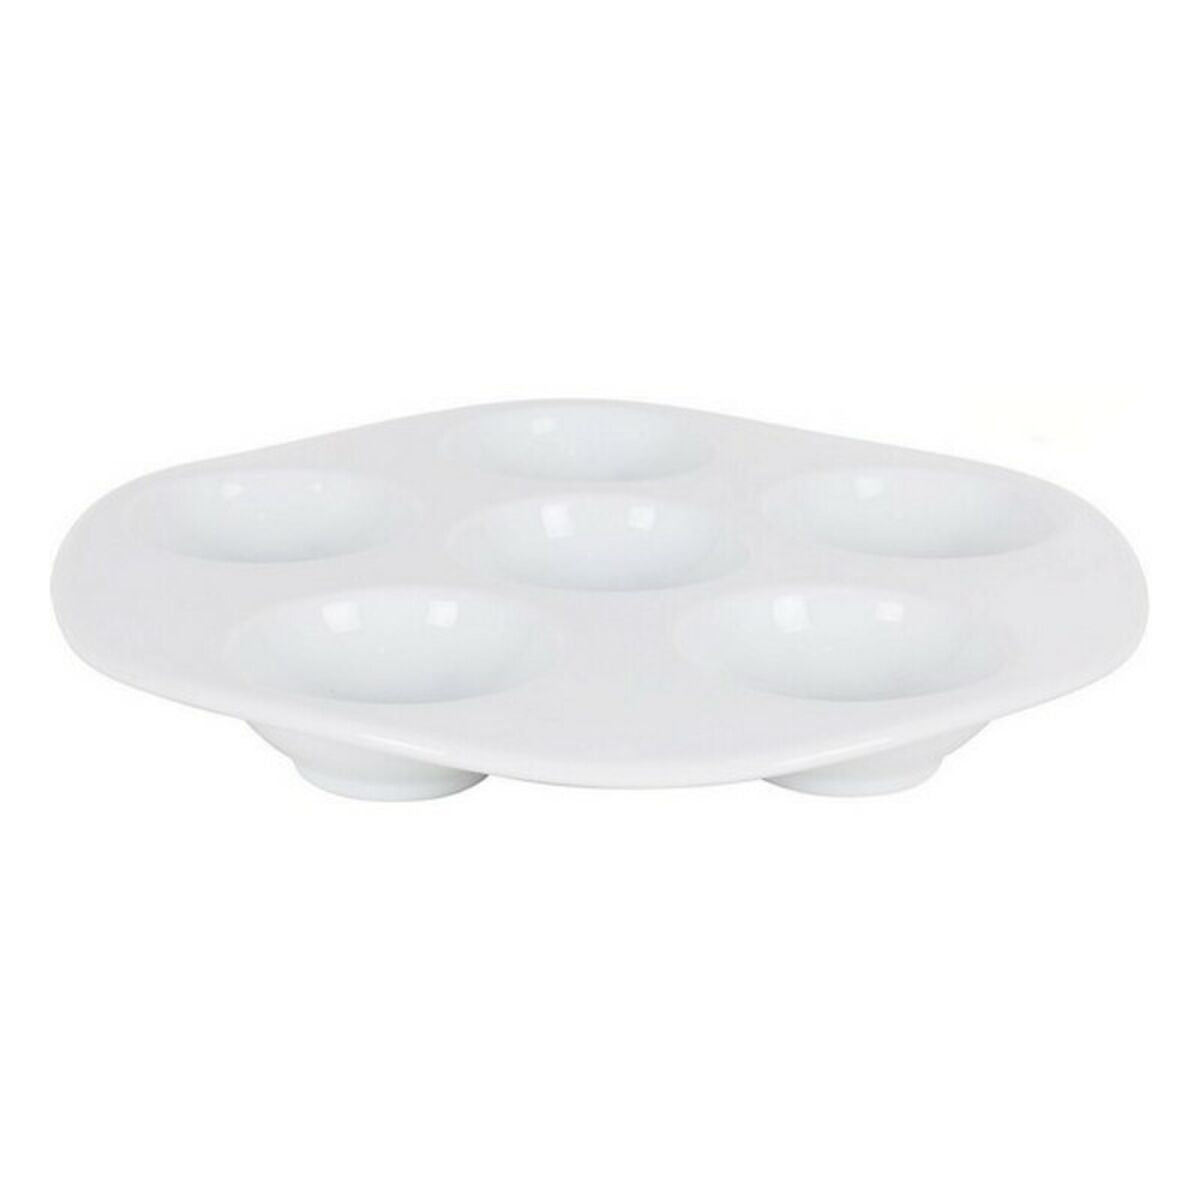 Snack Bowl Inde 729c3 White Porcelain 6 compartments